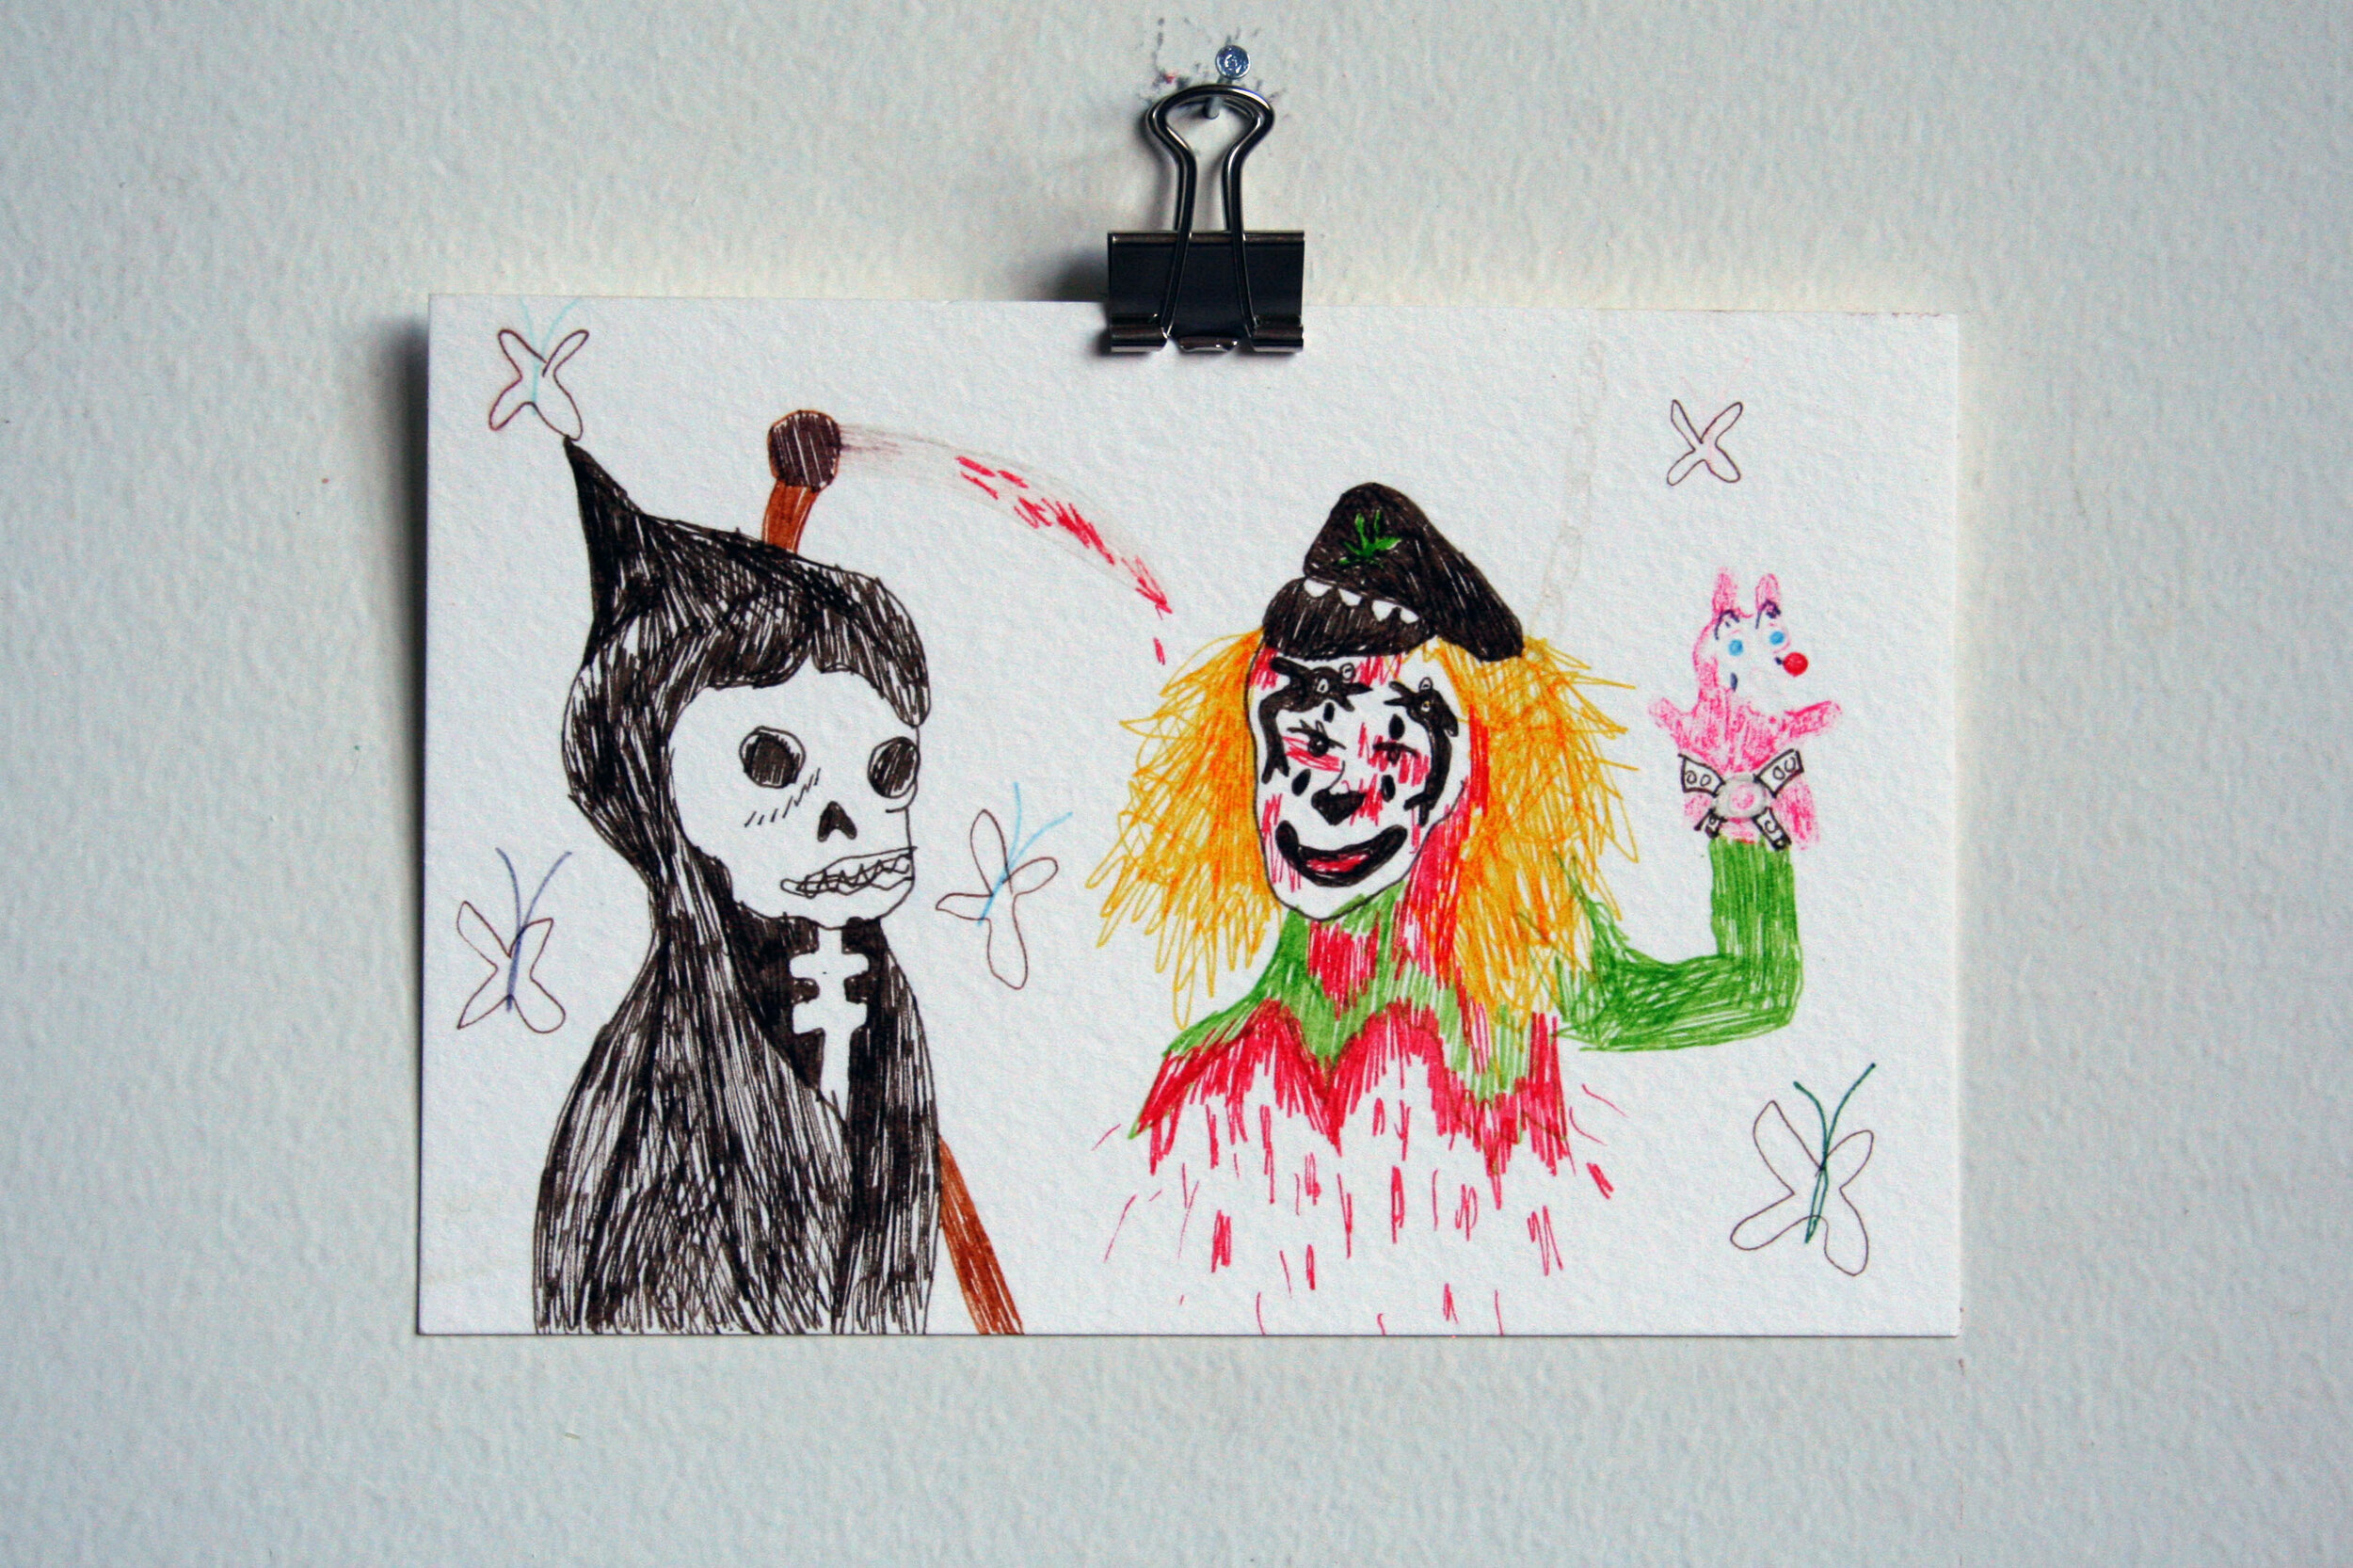   Old Put Plays with Death , 2015  4 x 6 inches (10.16 x 15.24 cm.)  Marker on paper 